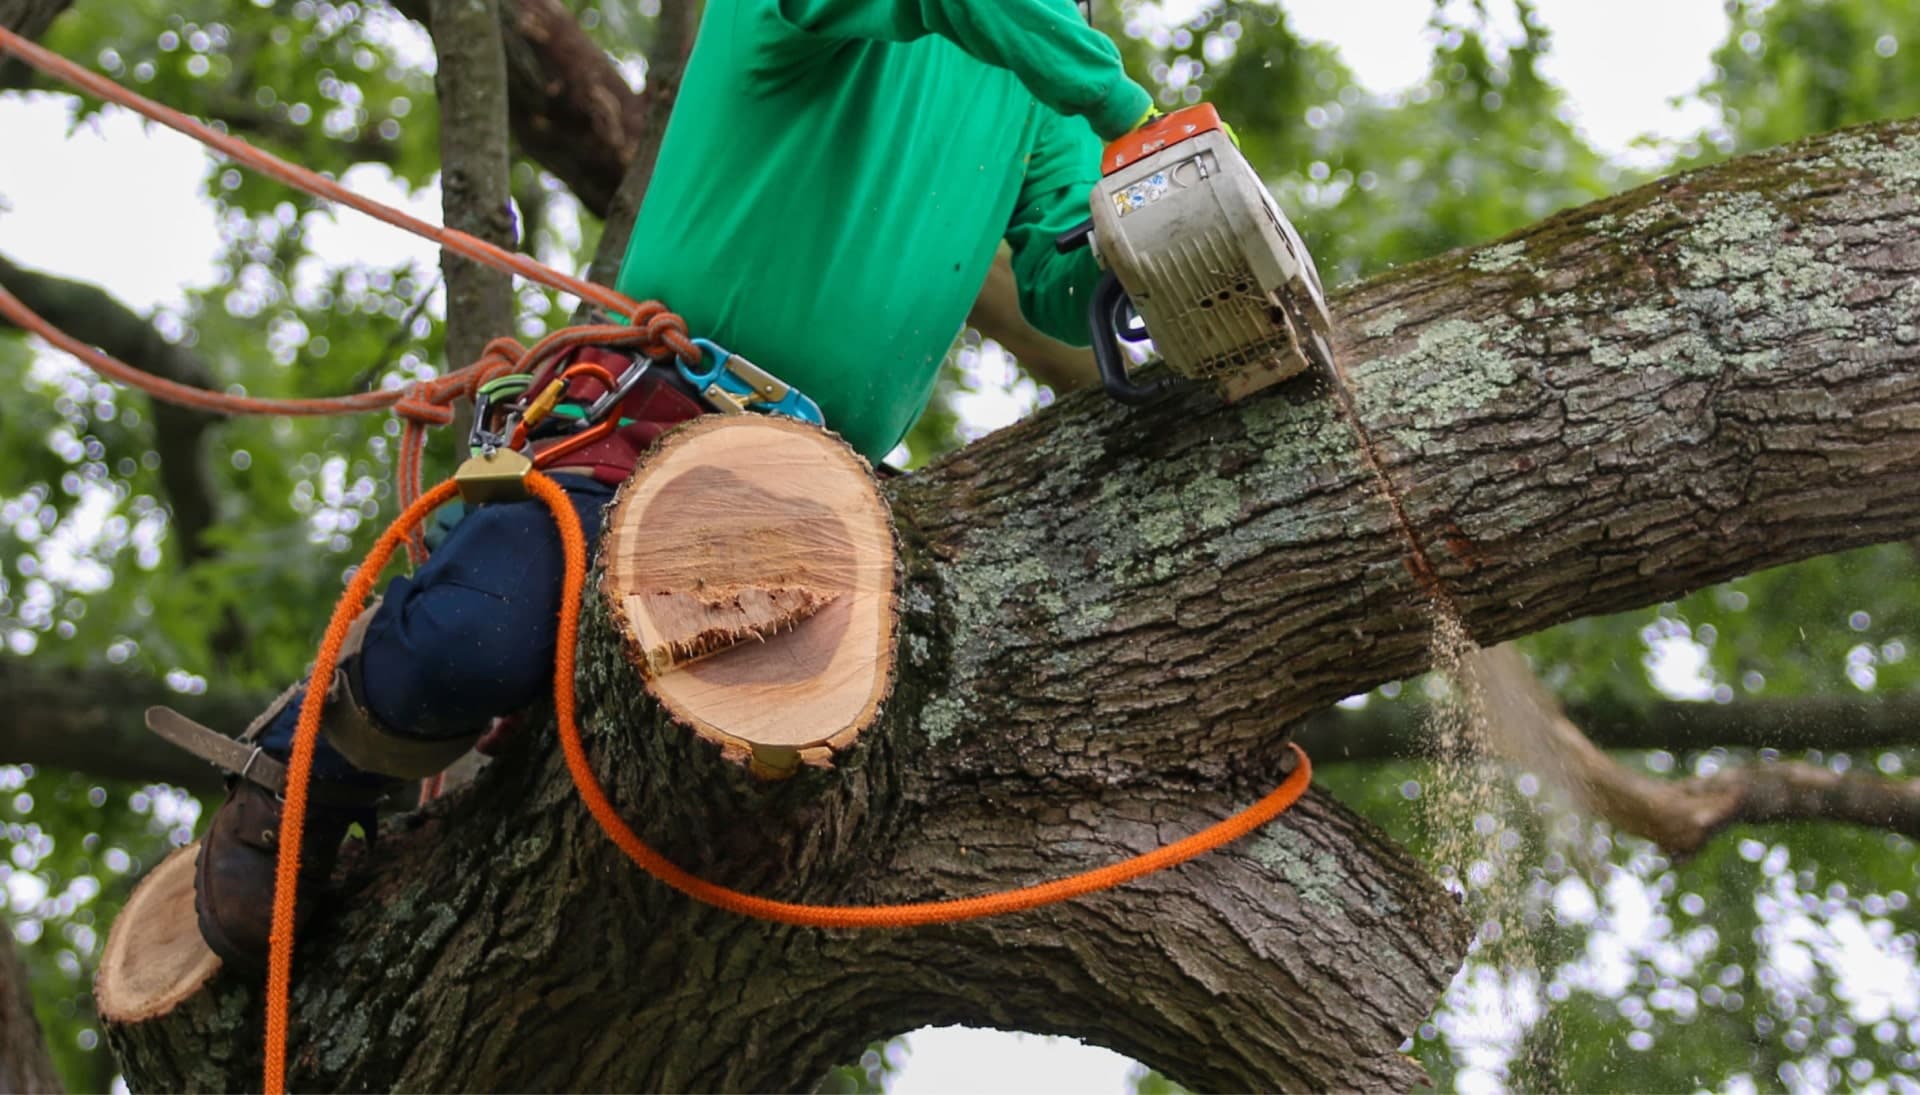 Shed your worries away with best tree removal in Nashville